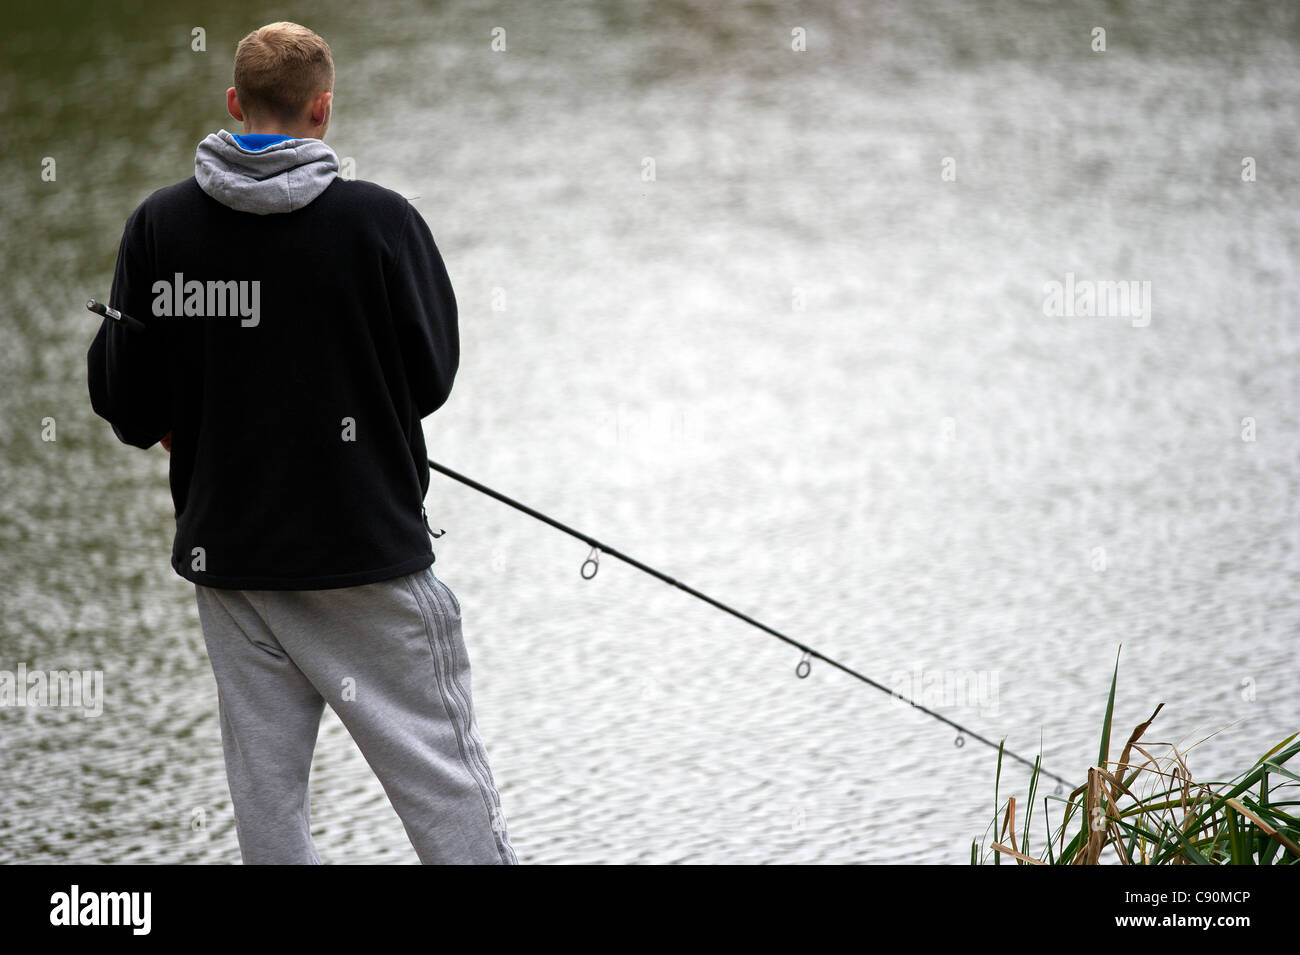 An angler fishing in a lake Stock Photo